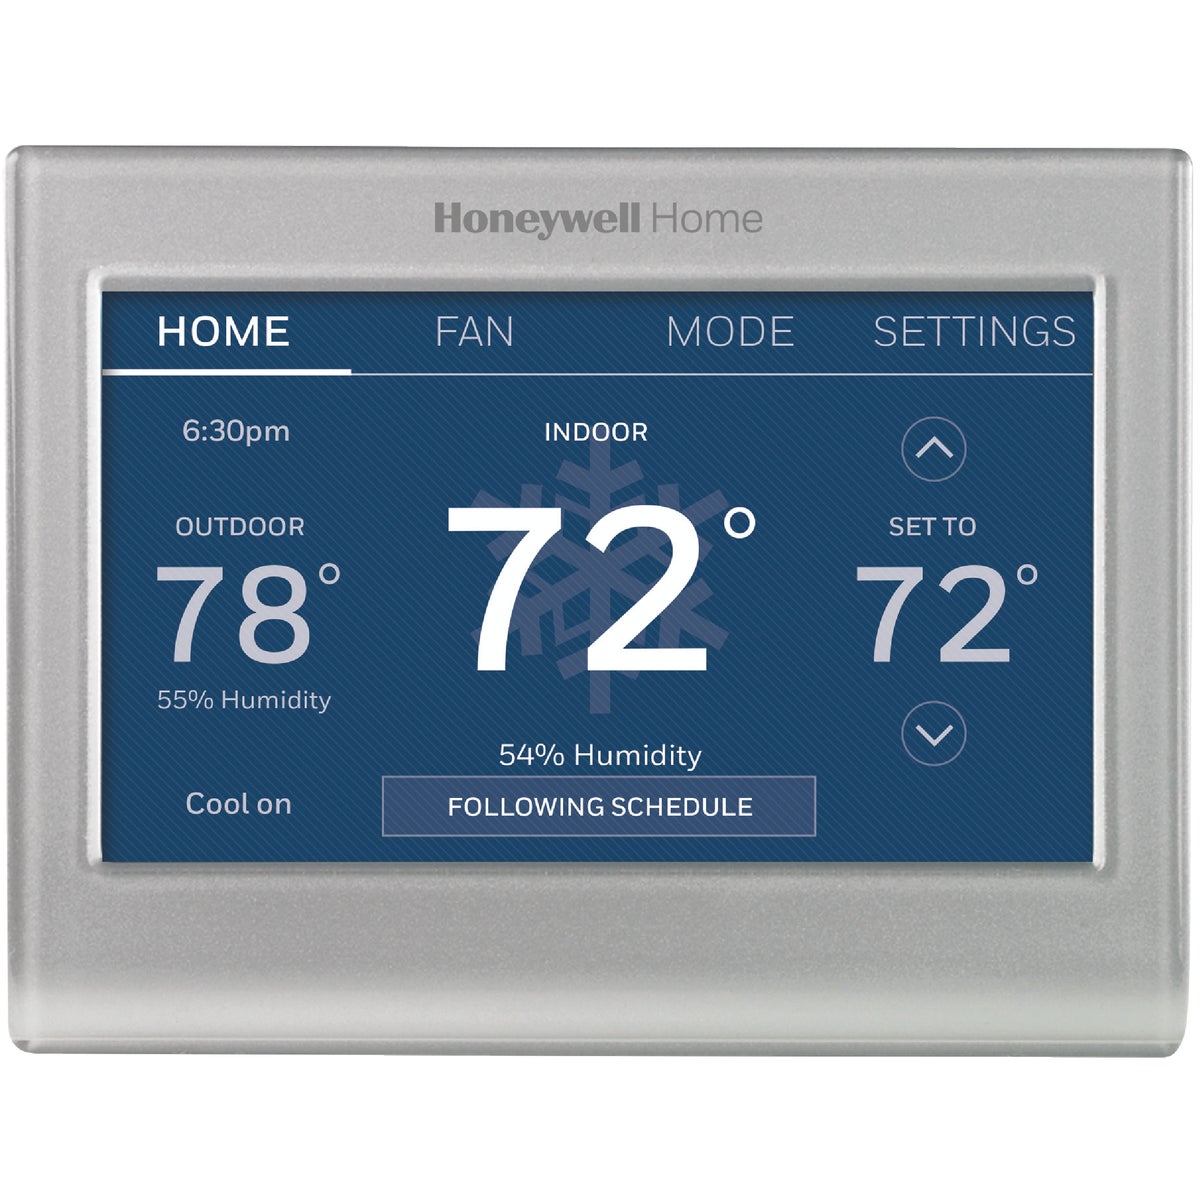 Item 401223, WiFi enabled thermostat is controllable from anywhere - via iPhone, iPad, 